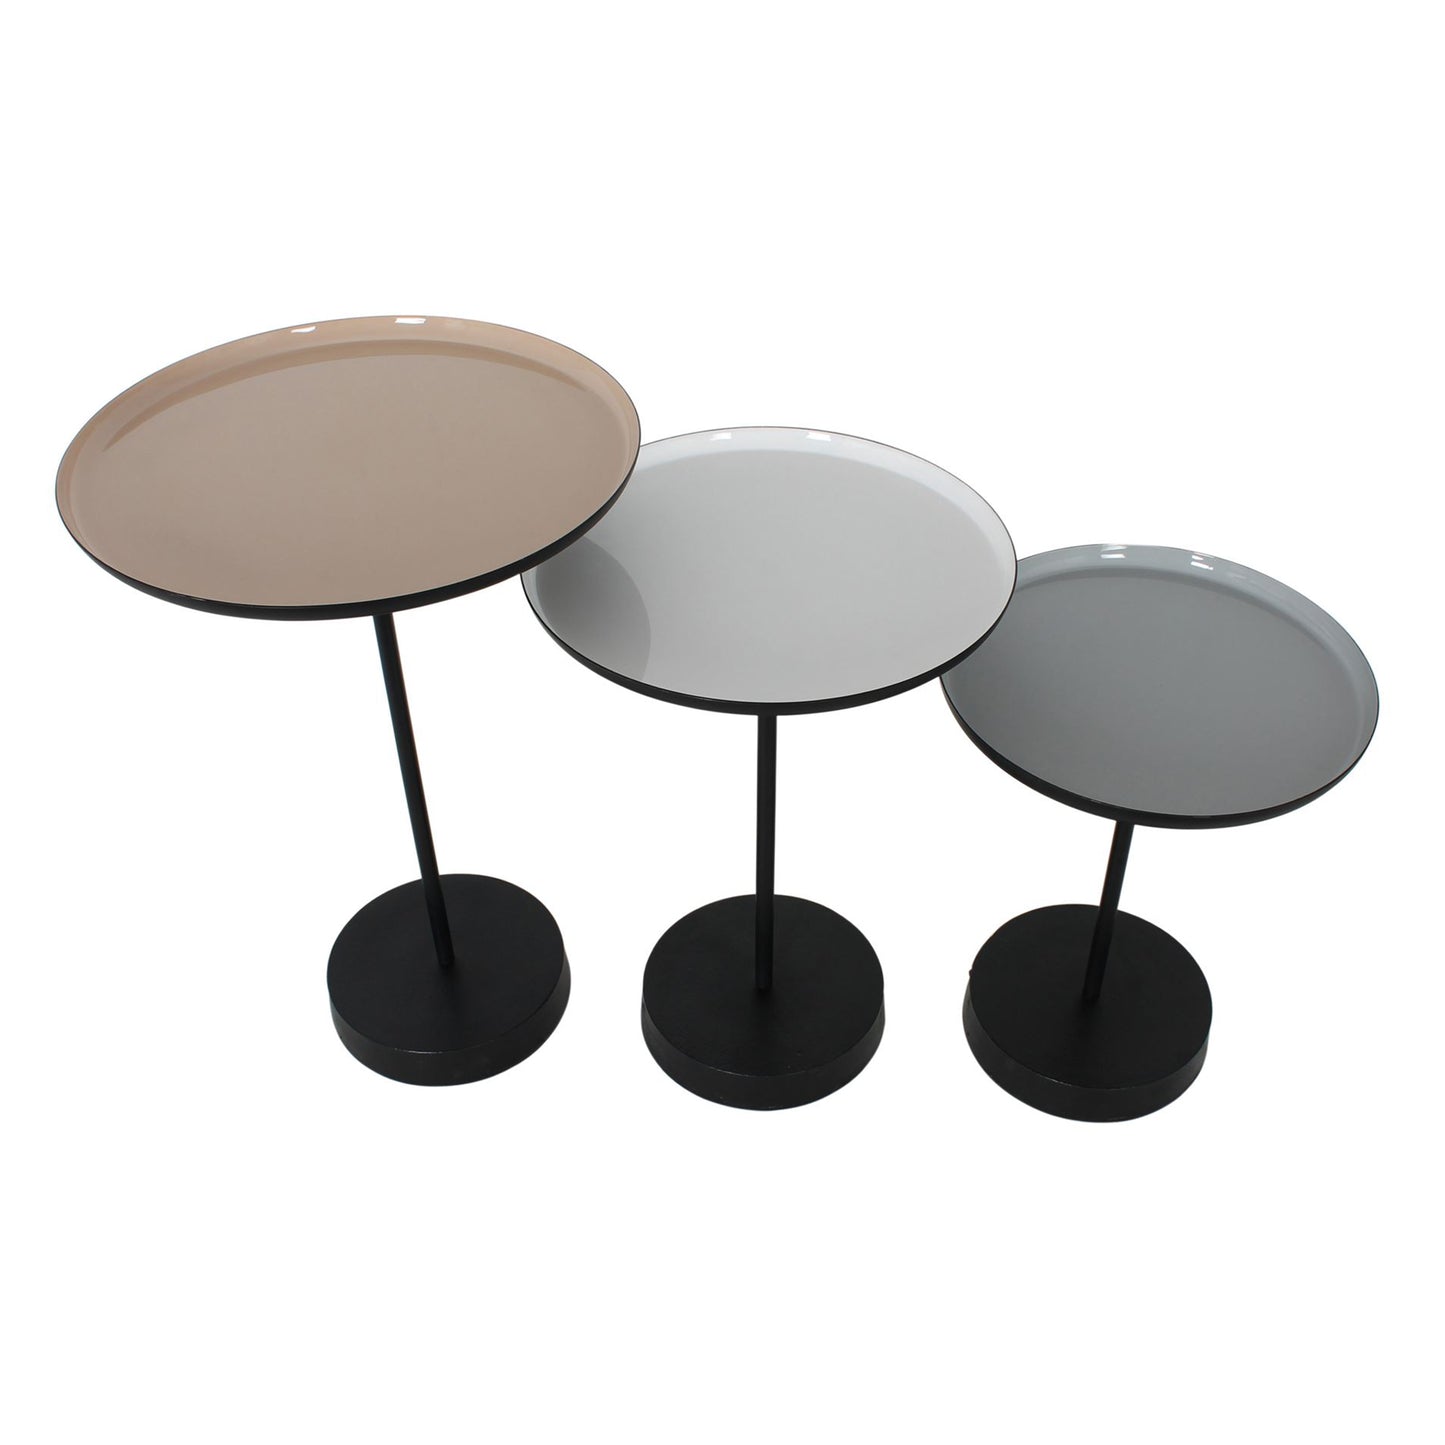 STEPPING STONE - set of 3 nesting tables